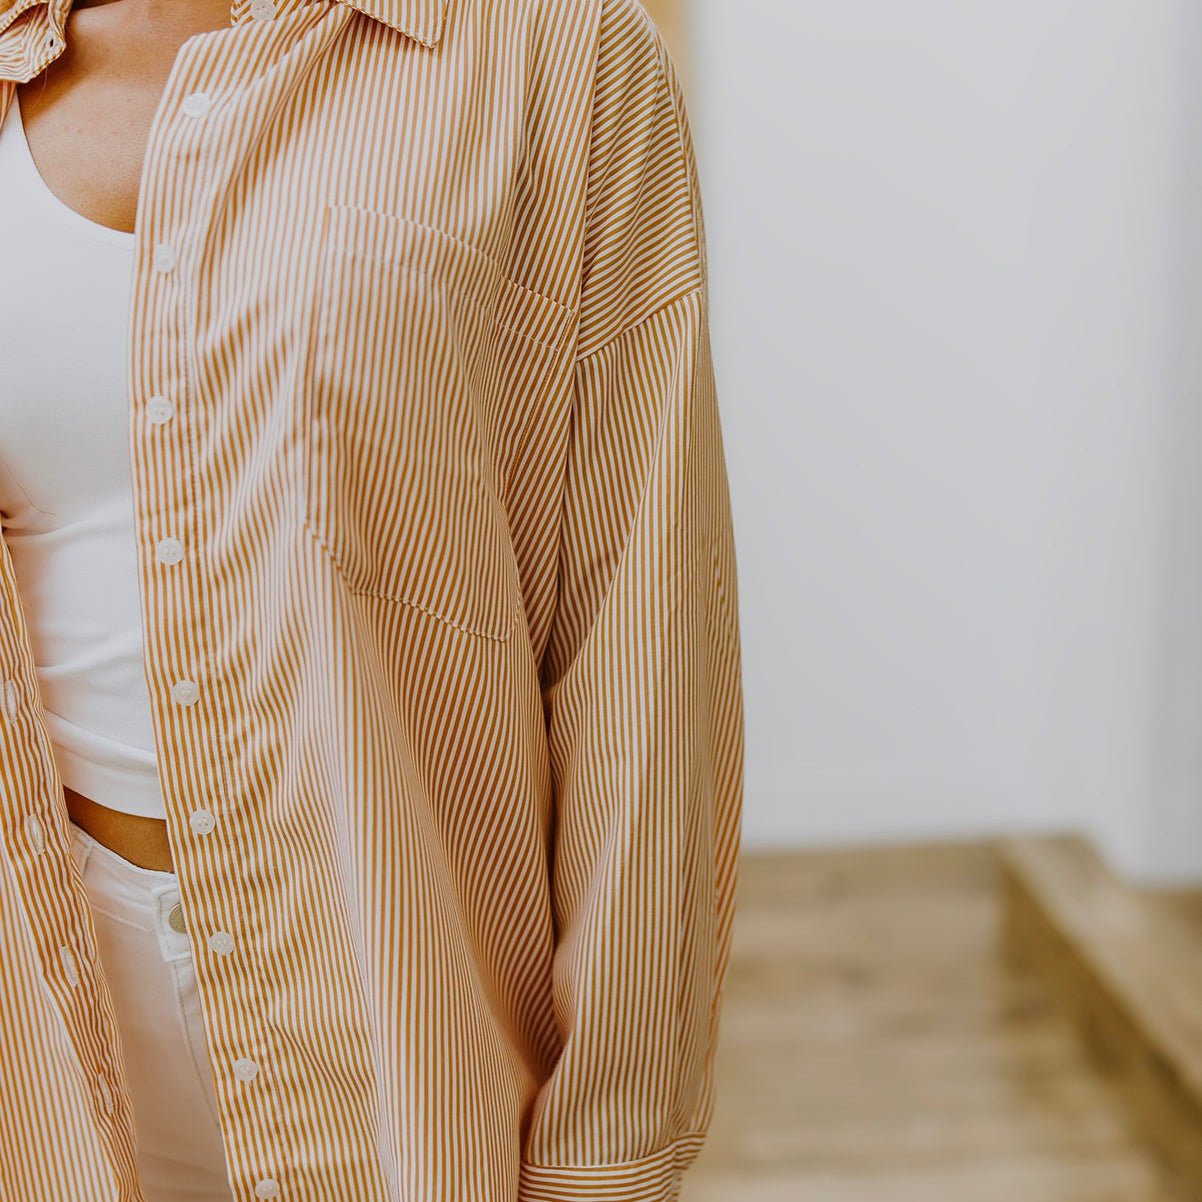 Easy On The Eyes Striped Button Up